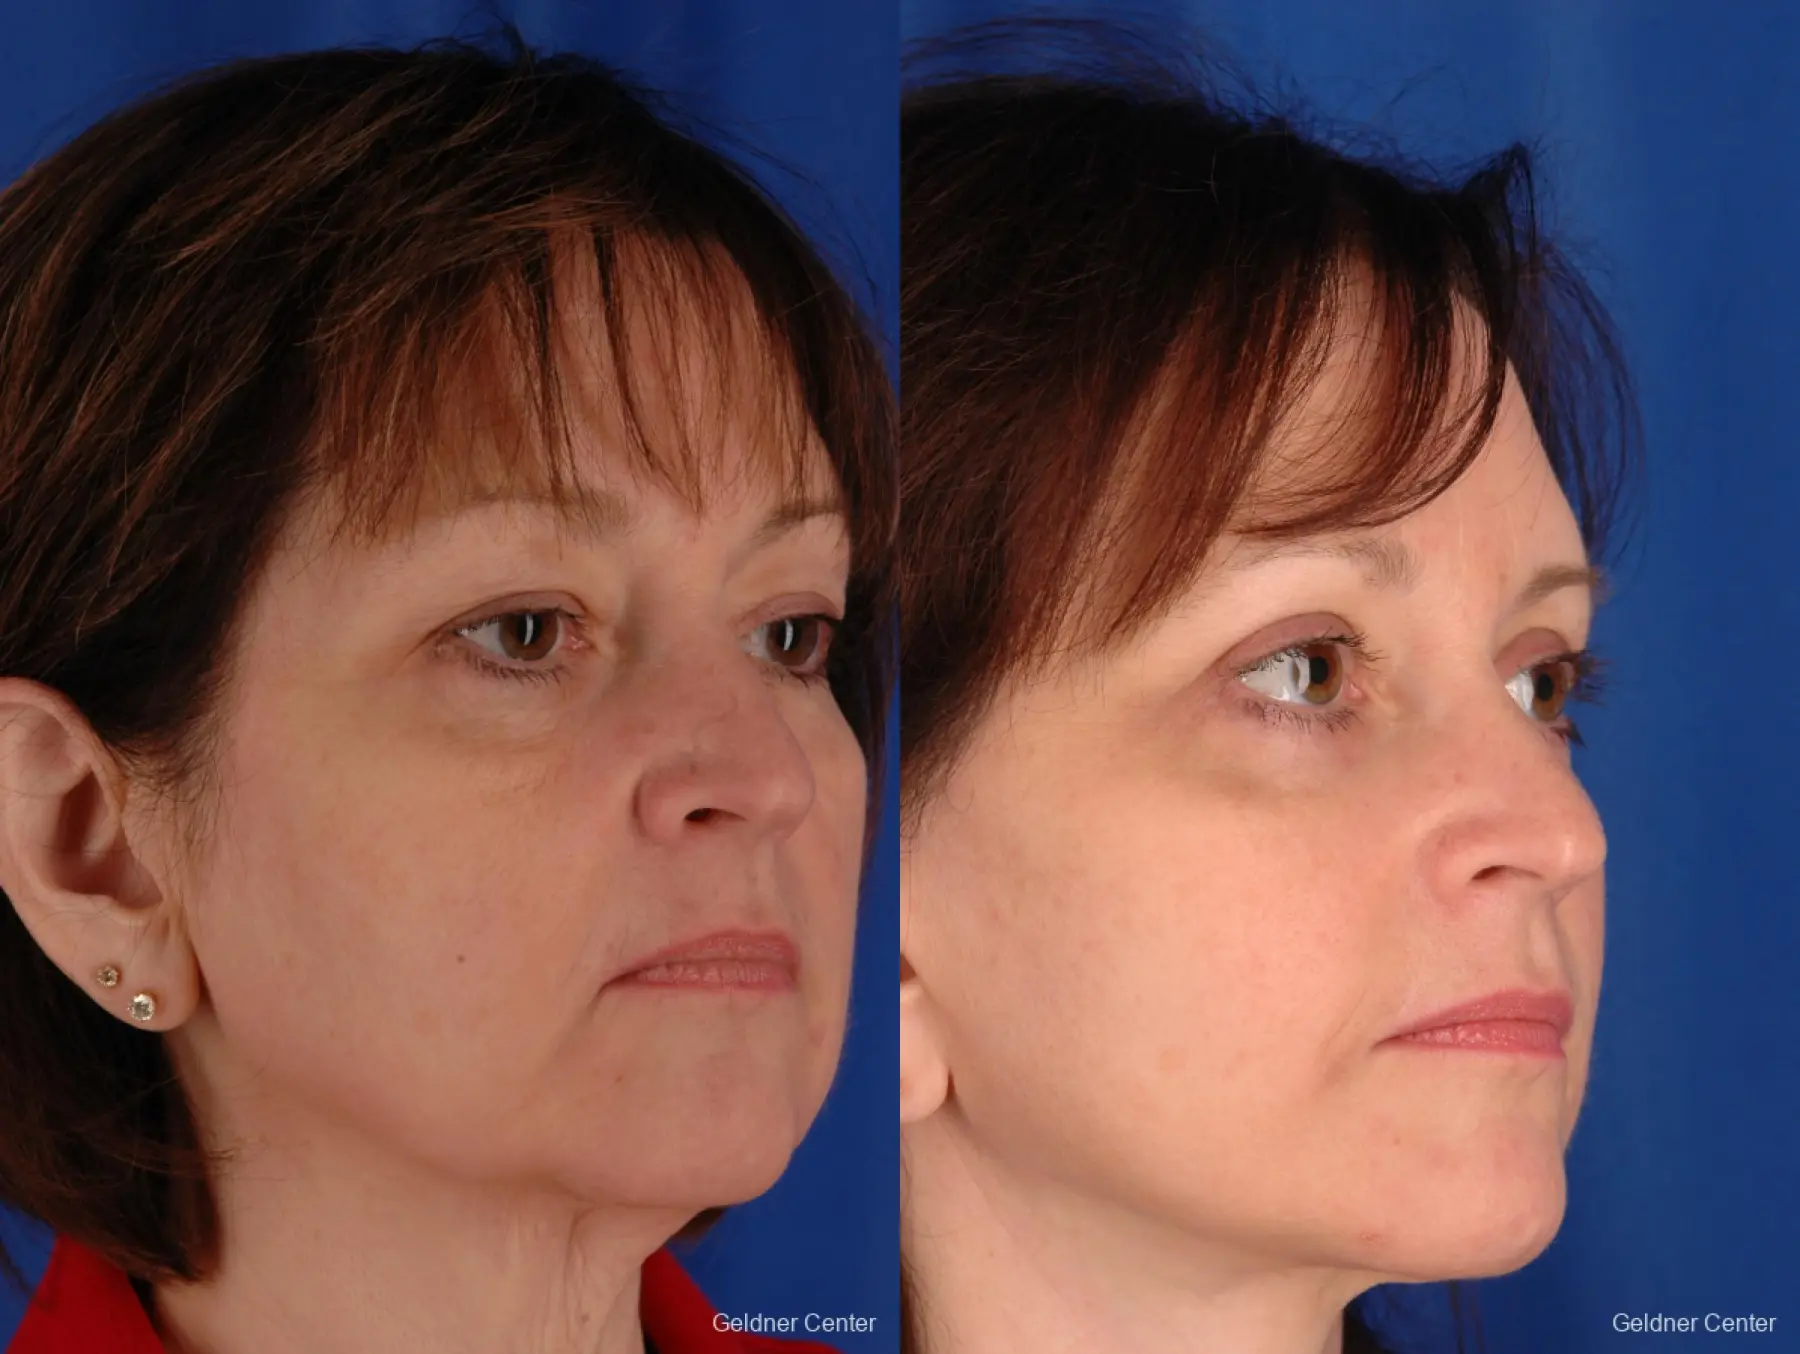 Neck Lift: Patient 2 - Before and After 3